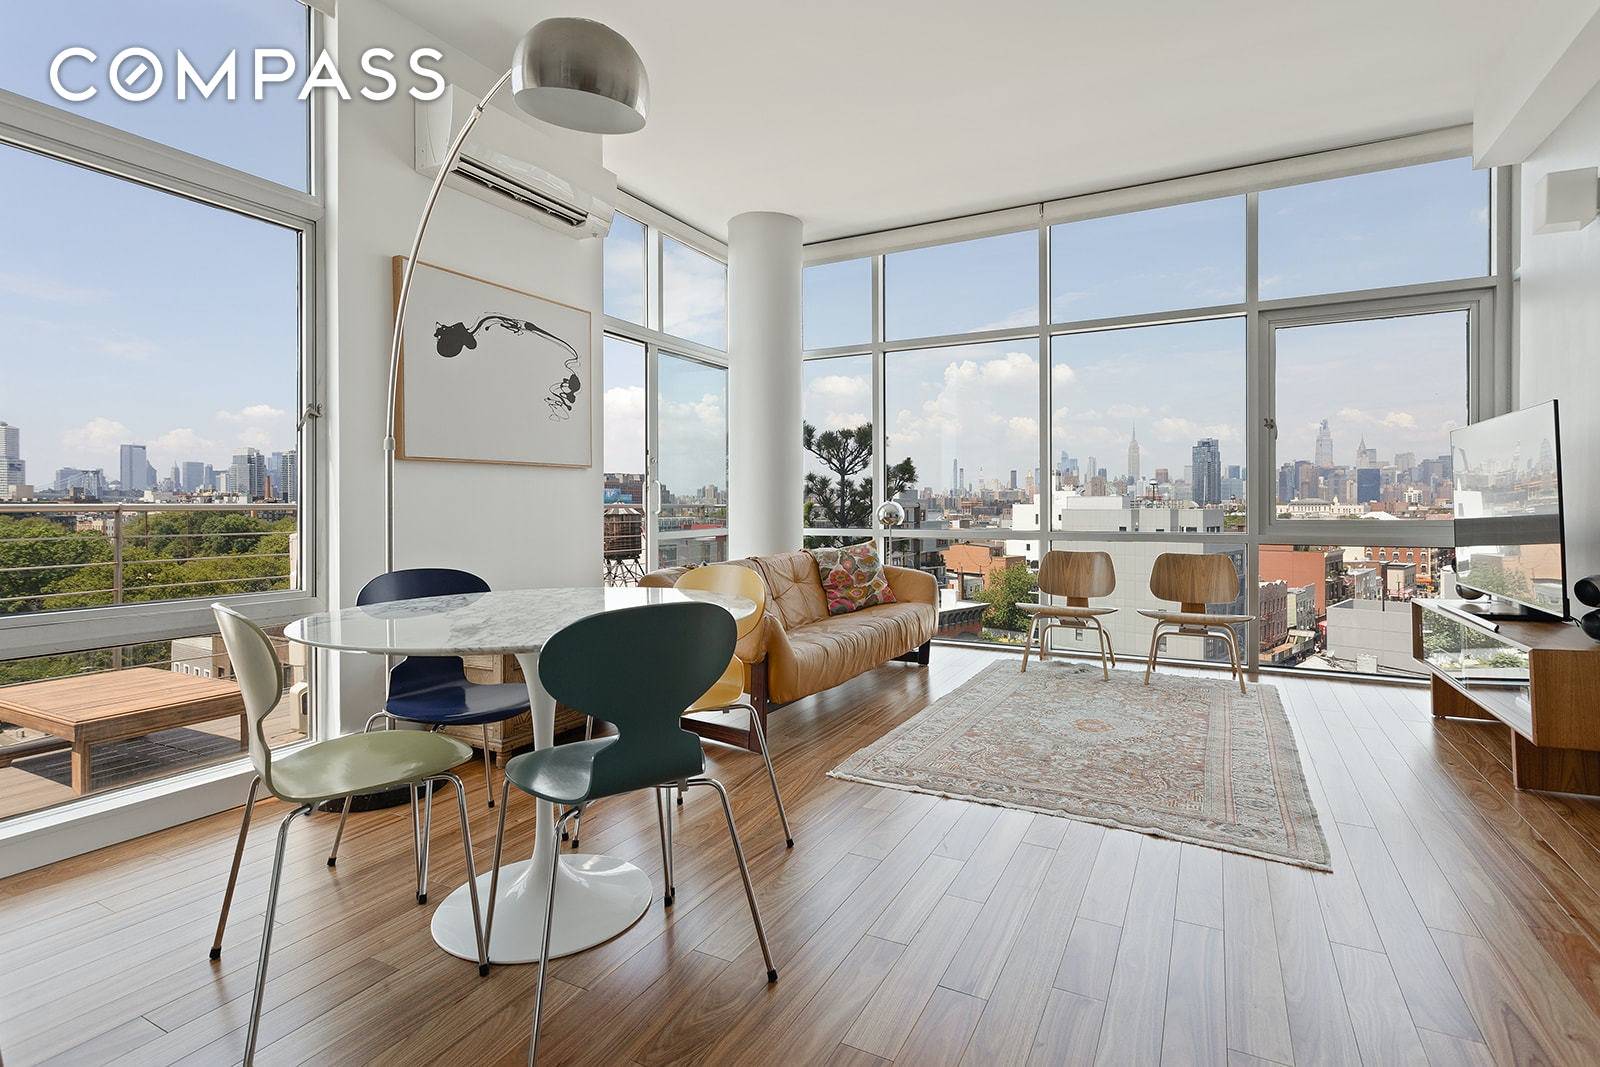 New to Market ! Stunning Penthouse in boutique Williamsburg Condo with jaw dropping Manhattan and Brooklyn views for only 1, 250, 000.